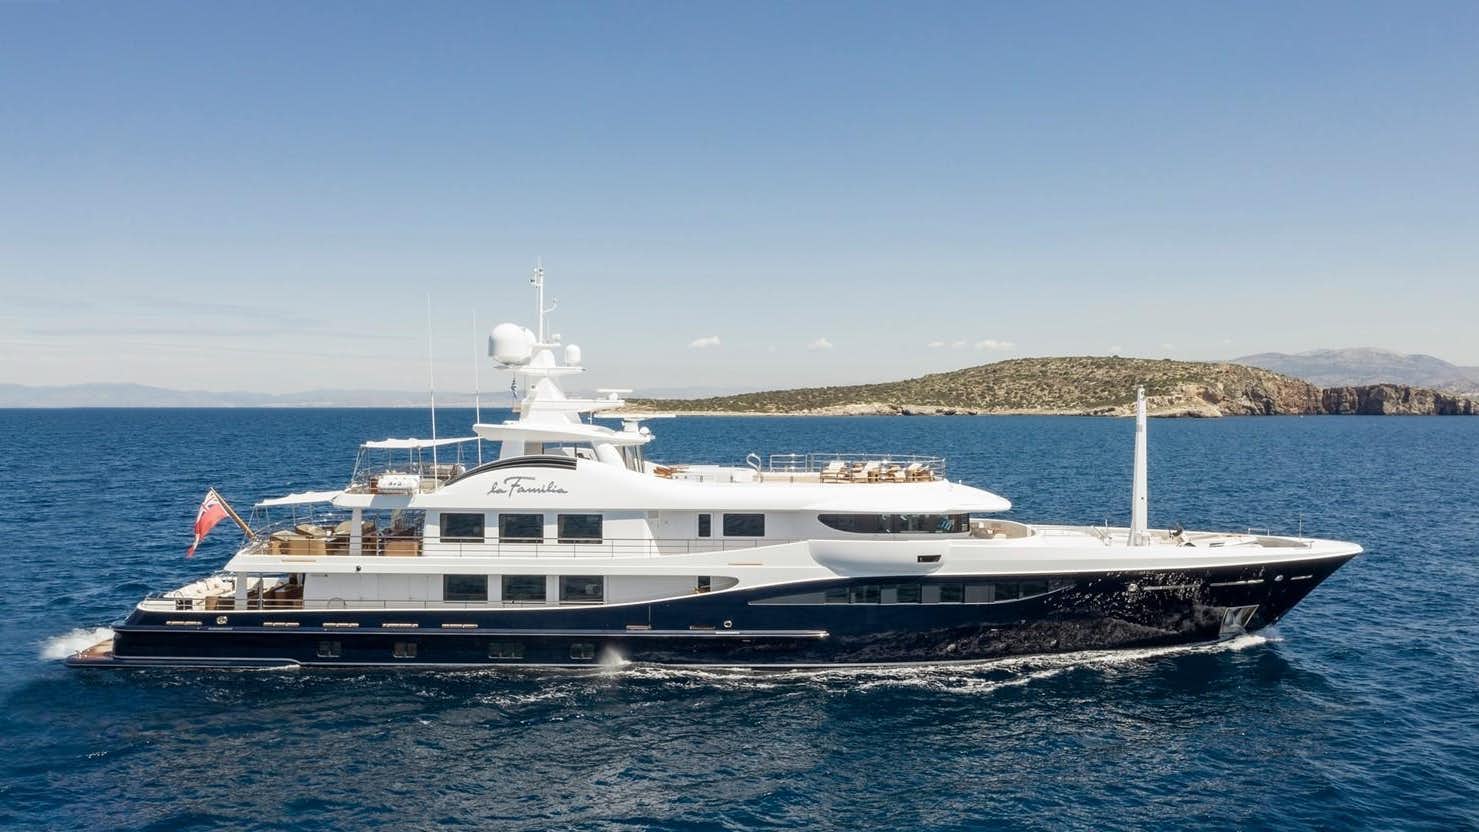 a boat on the water aboard LA FAMILIA Yacht for Sale